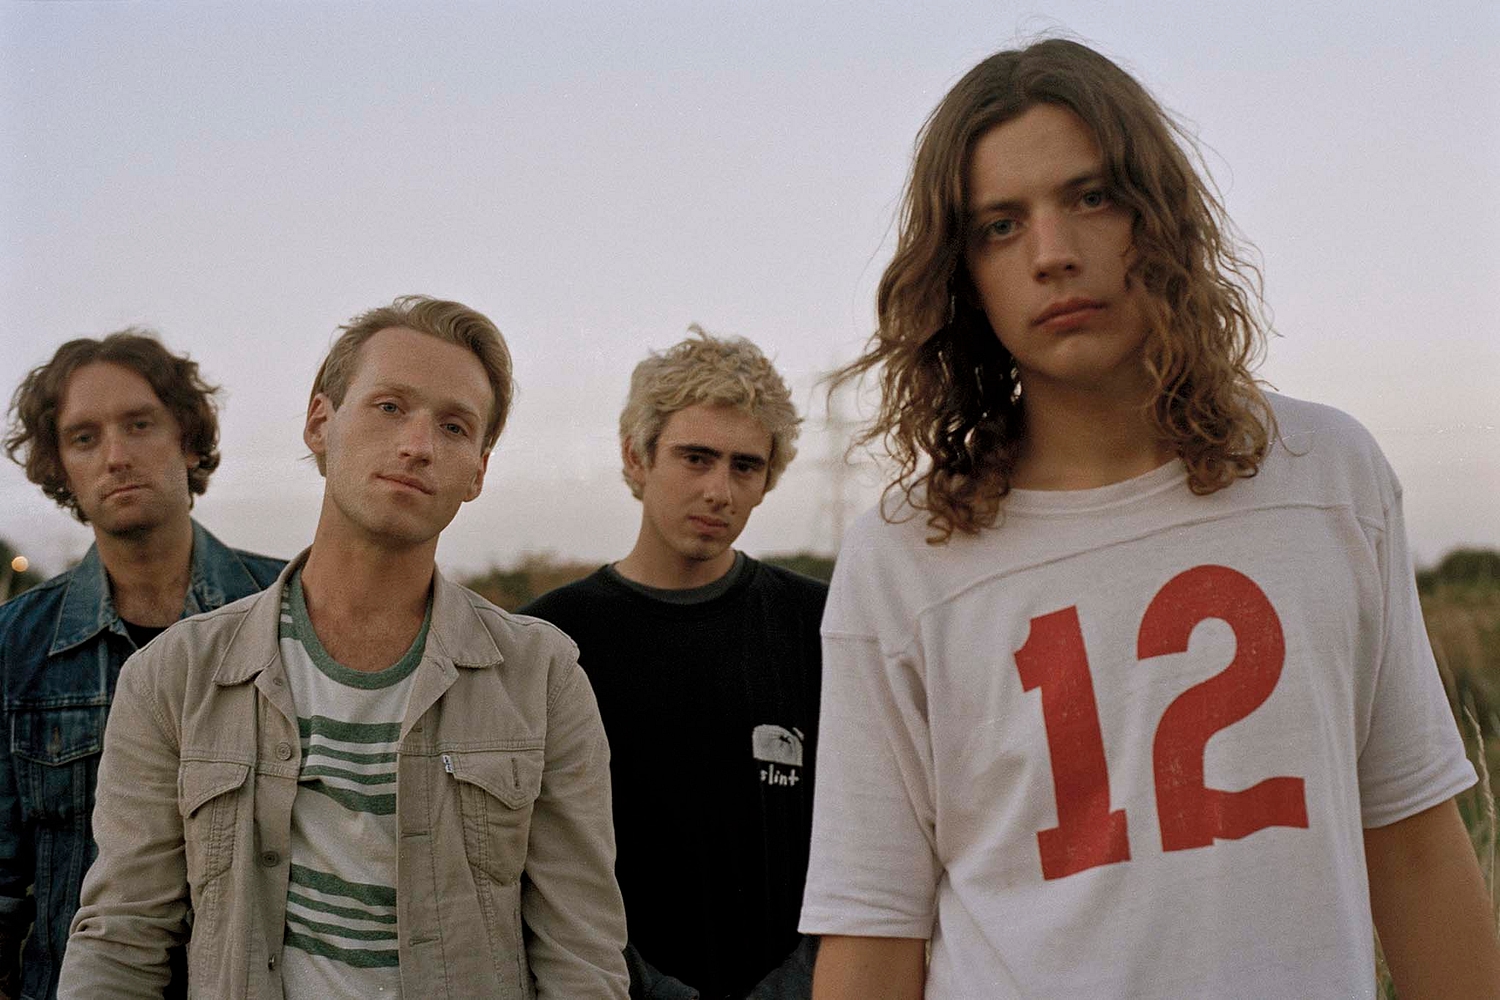 Win tickets to see VANT play the Stand For Something Tour